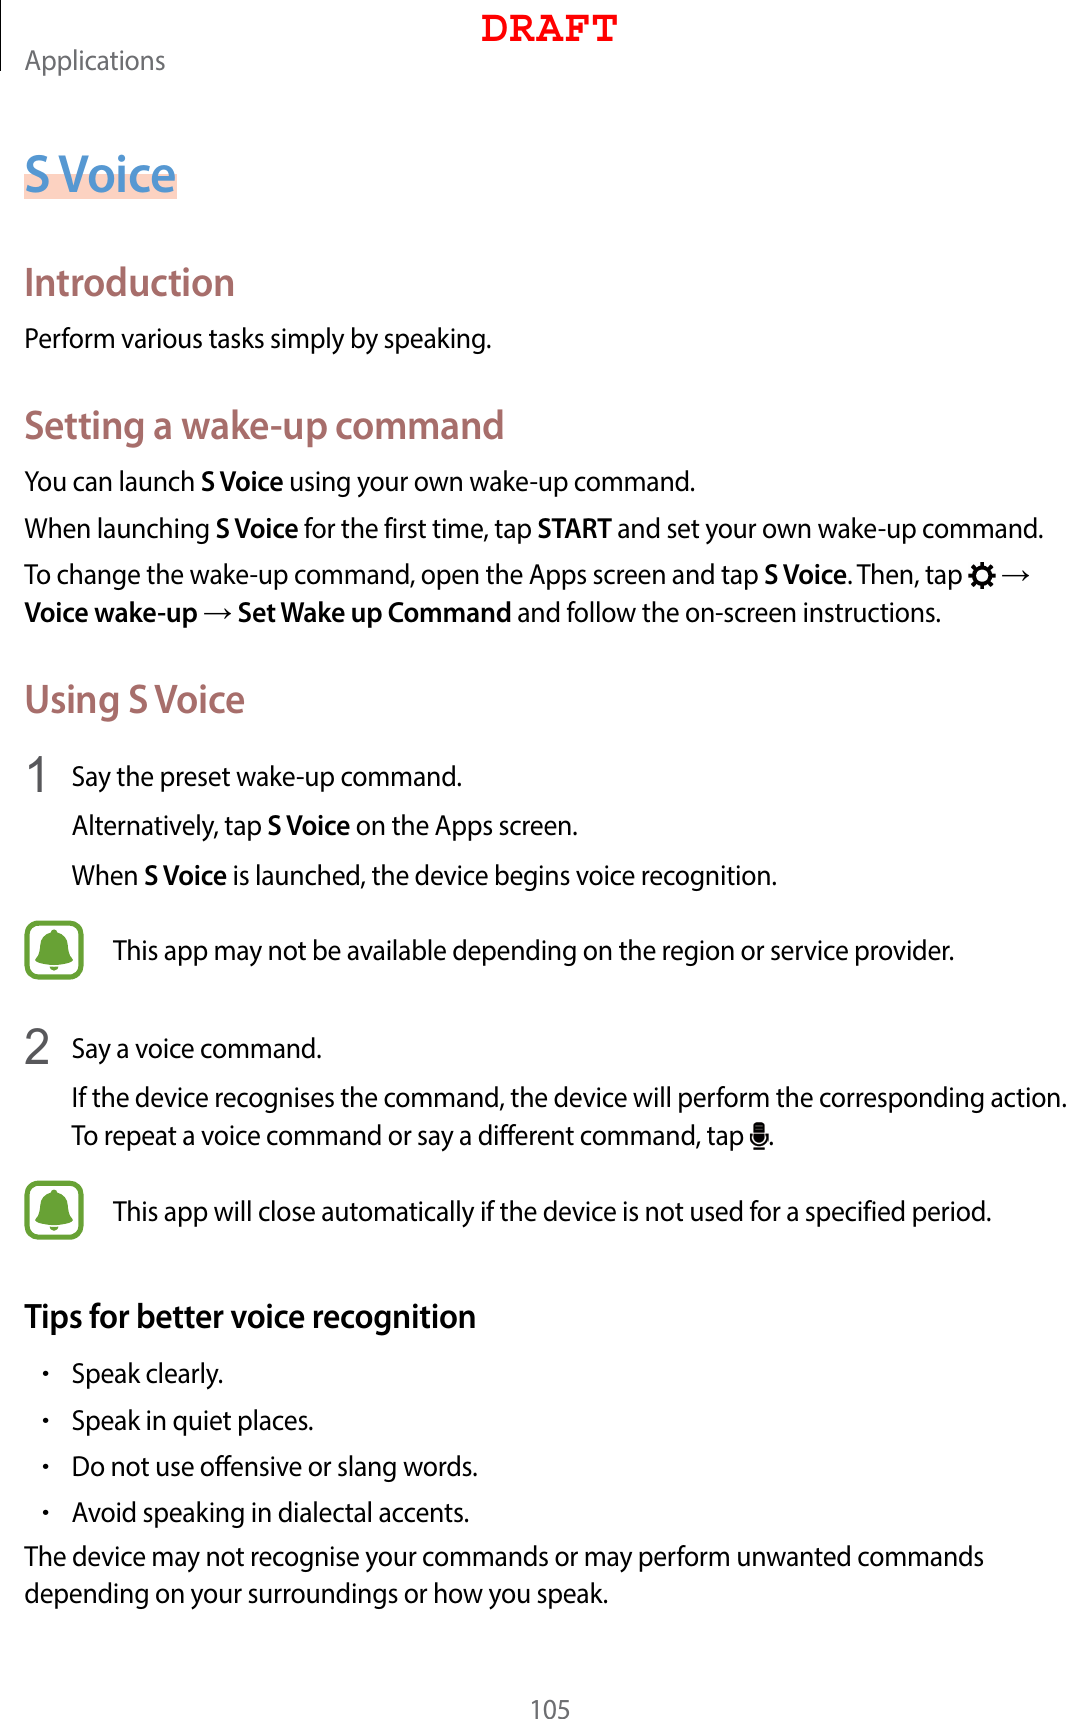 Applications105S VoiceIntroductionPerform various tasks simply by speaking.Setting a wake-up commandYou can launch S Voice using your own wake-up command.When launching S Voice for the first time, tap START and set your own wake-up command.To change the wake-up command, open the Apps screen and tap S Voice. Then, tap    Voice wake-up  Set Wake up Command and follow the on-screen instructions.Using S Voice1  Say the preset wake-up command.Alternatively, tap S Voice on the Apps screen.When S Voice is launched, the device begins voice recognition.This app may not be available depending on the region or service provider.2  Say a voice command.If the device recognises the command, the device will perform the corresponding action. To repeat a voice command or say a different command, tap  .This app will close automatically if the device is not used for a specified period.Tips for better voice recognition•Speak clearly.•Speak in quiet places.•Do not use offensive or slang words.•Avoid speaking in dialectal accents.The device may not recognise your commands or may perform unwanted commands depending on your surroundings or how you speak.DRAFT